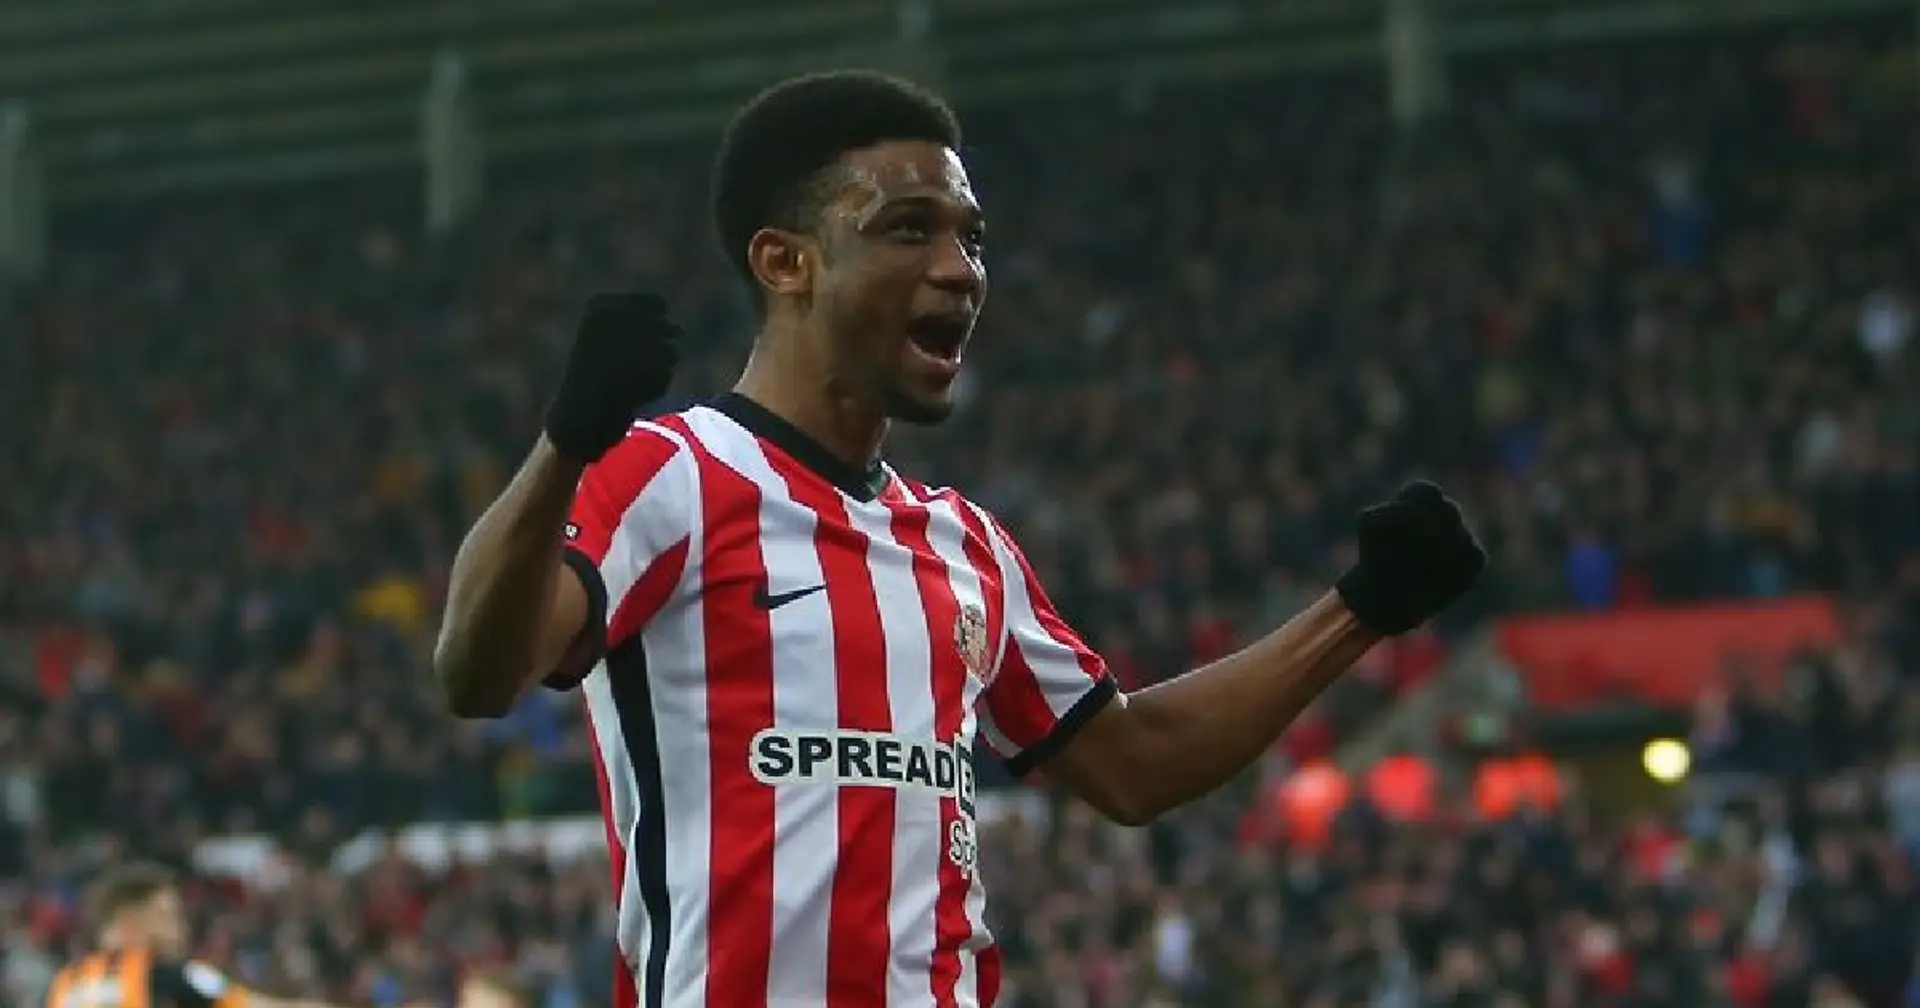 Amad Diallo involved in all 4 goals for Sunderland vs Hull — his season tally revealed 